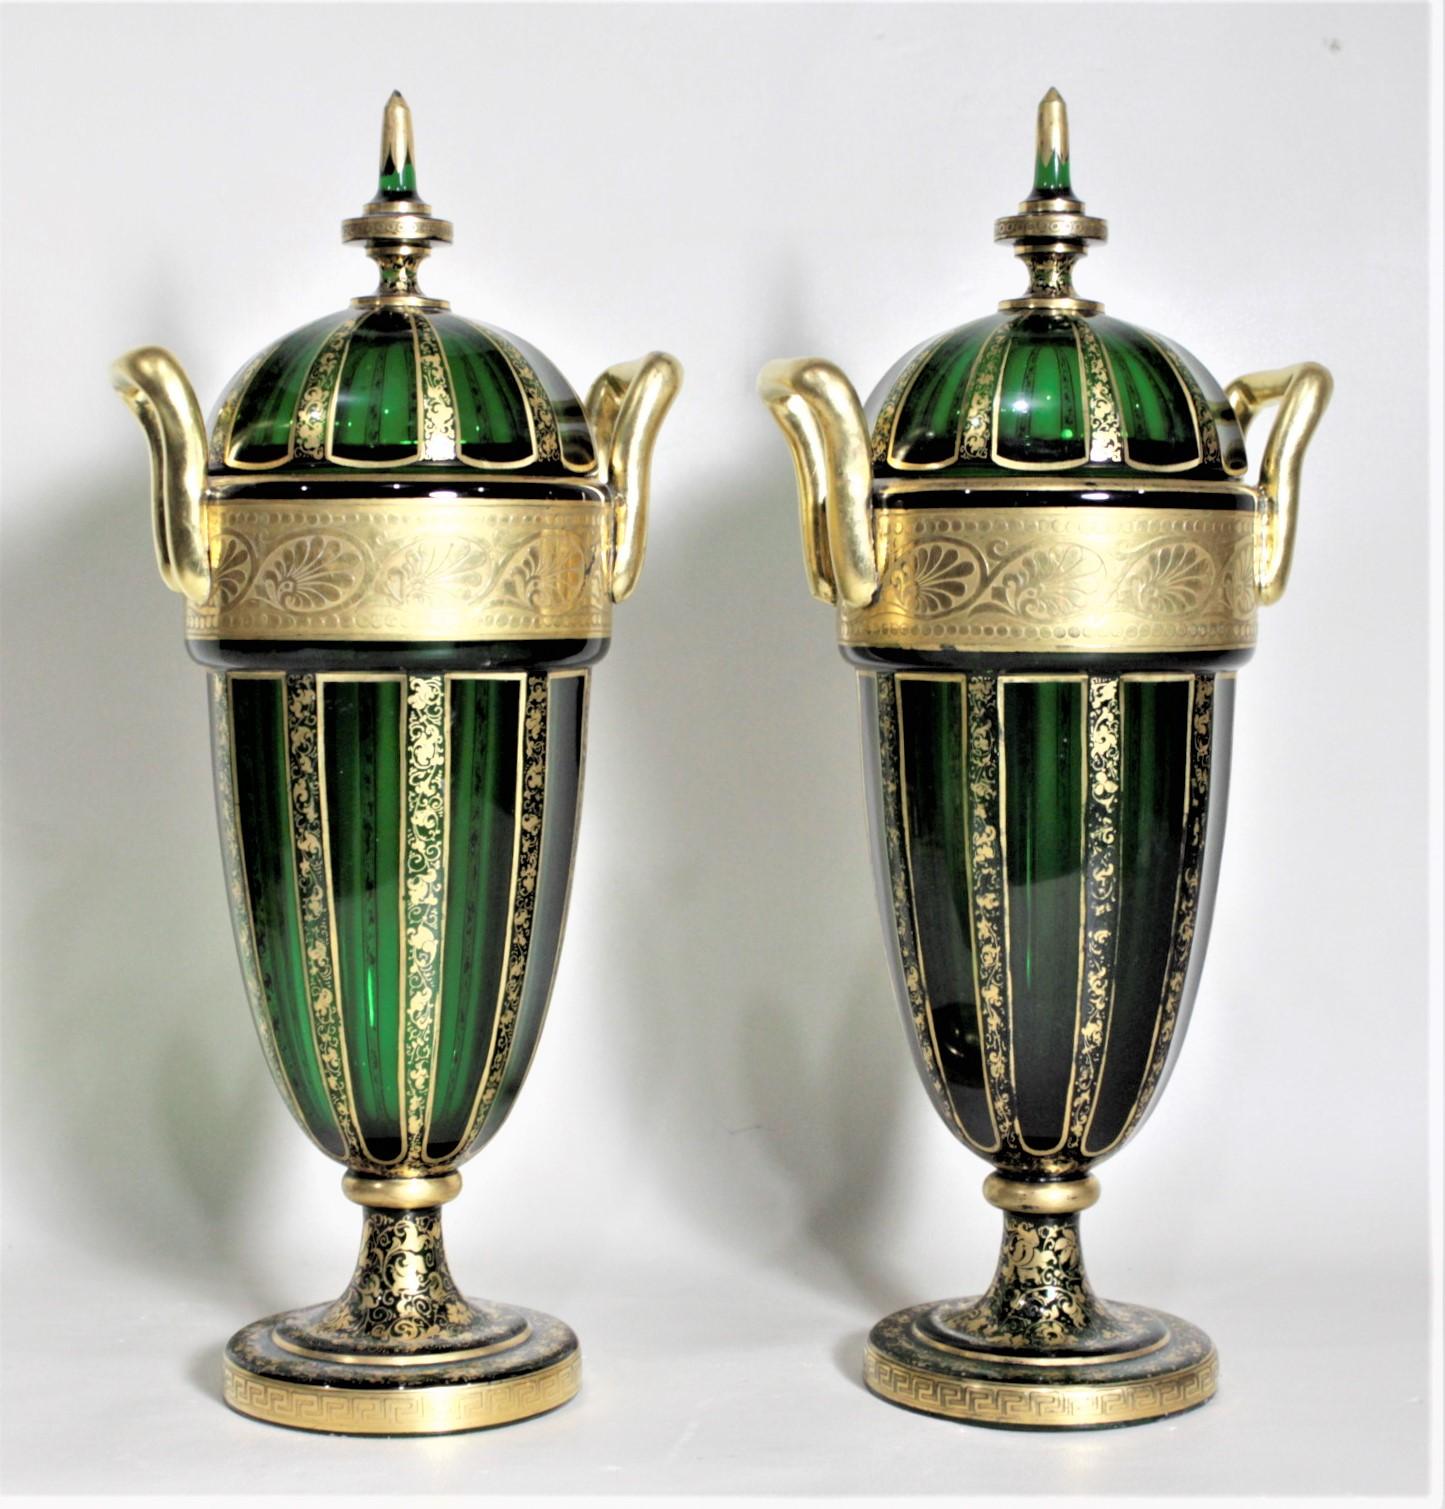 This pair of antique Bohemian glass covered urns or vases were handcrafted in circa 1880 in the period Victorian style. The urns are done in a deep green with intricate gilt decoration in a scrolling leaf done around the upper rim and down the